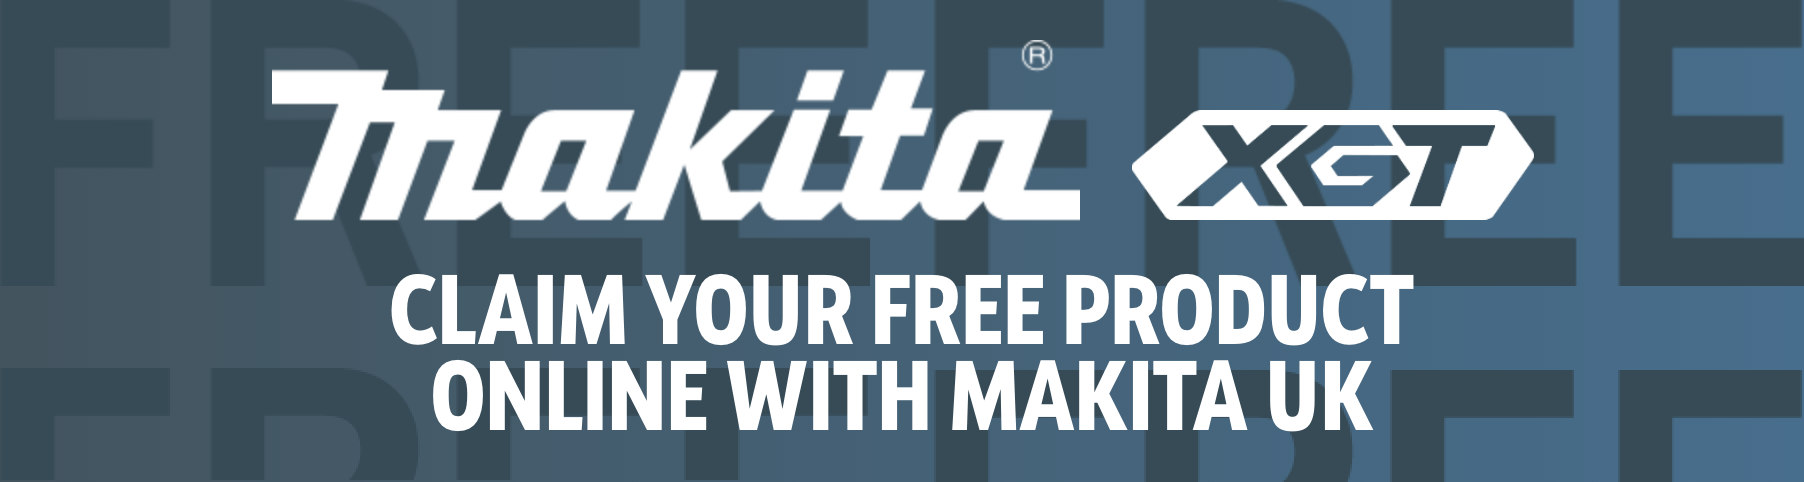 Makita XGT free product offer